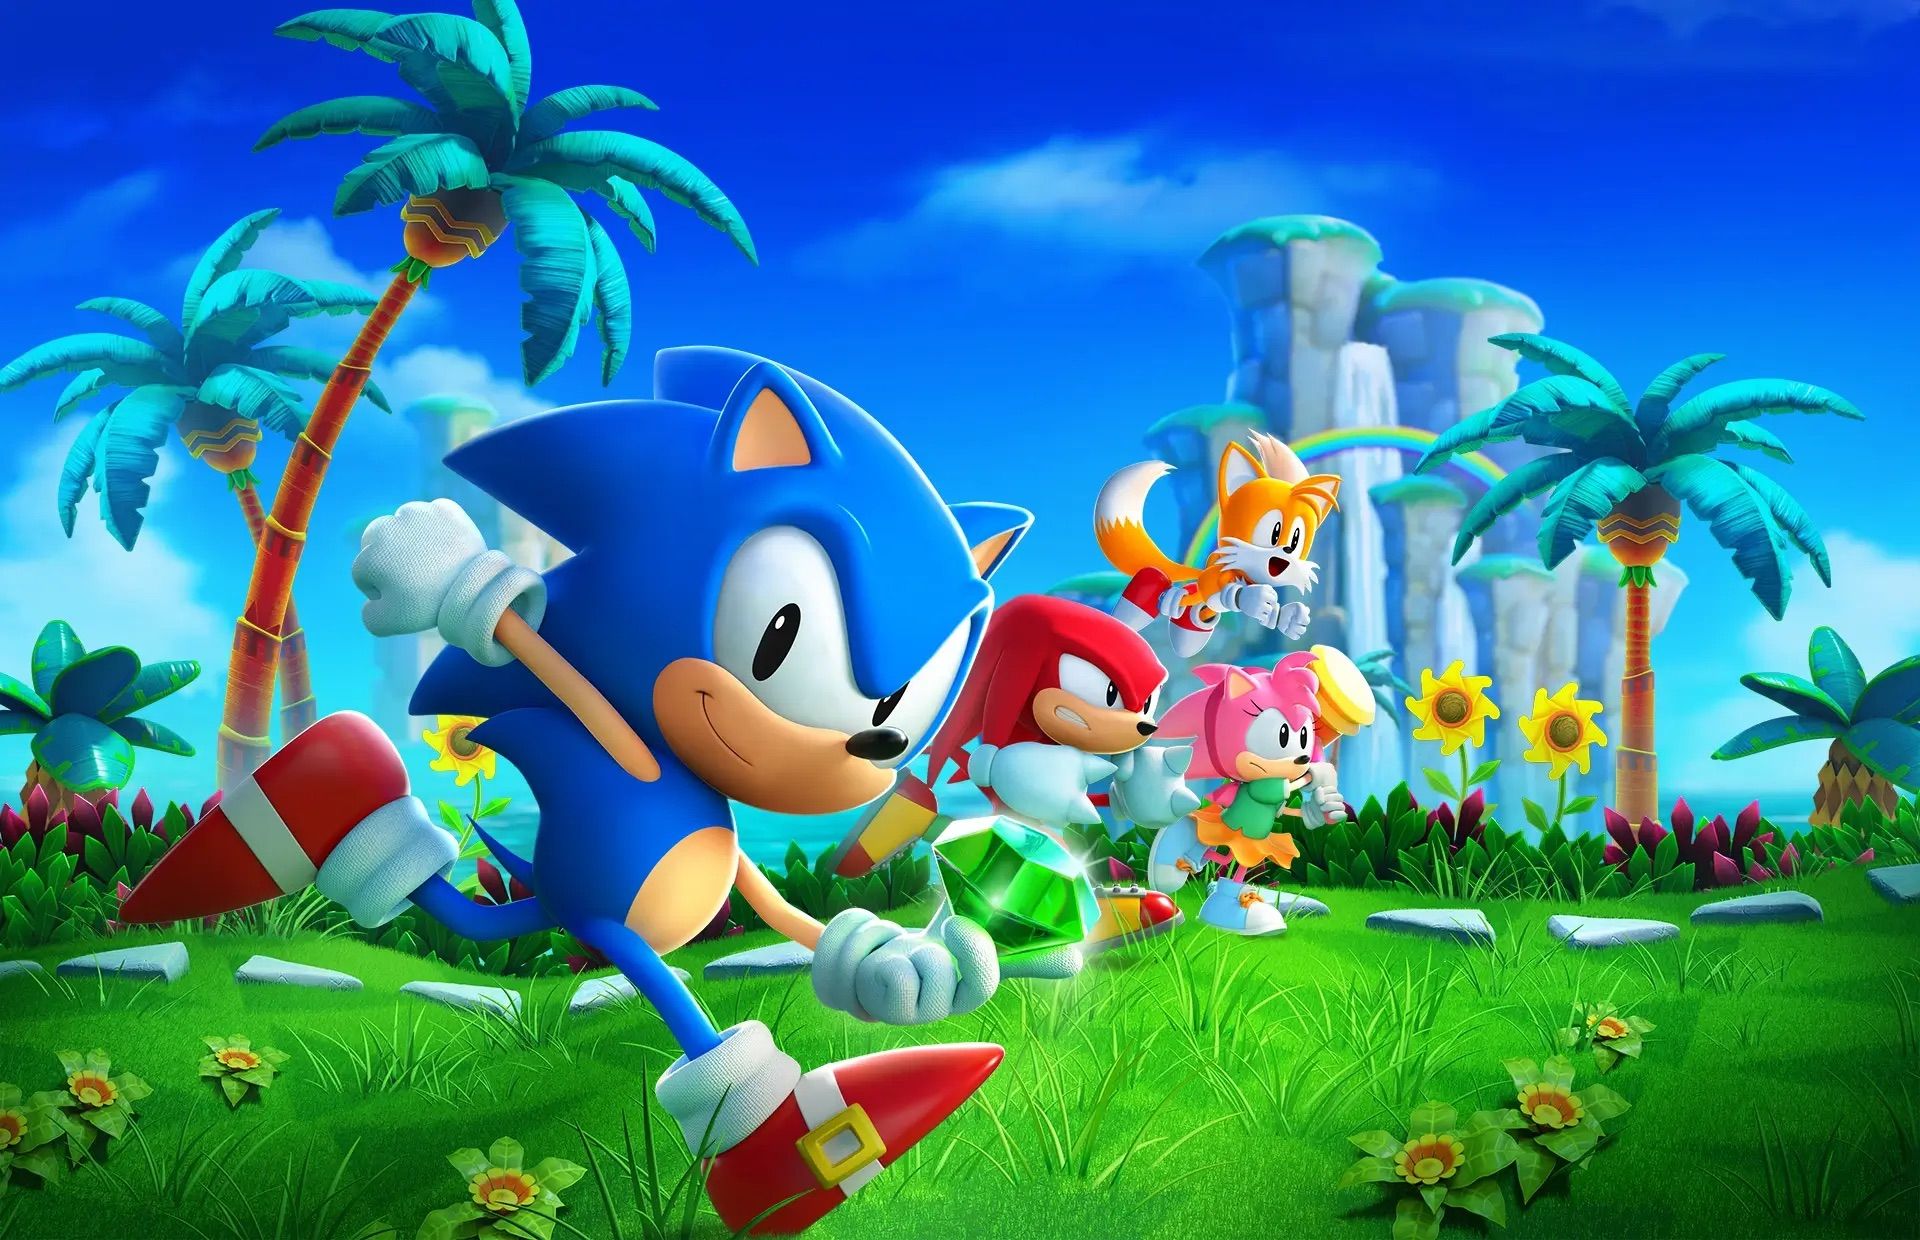 Characters from Sonic the Hedgehog running in a tropical setting